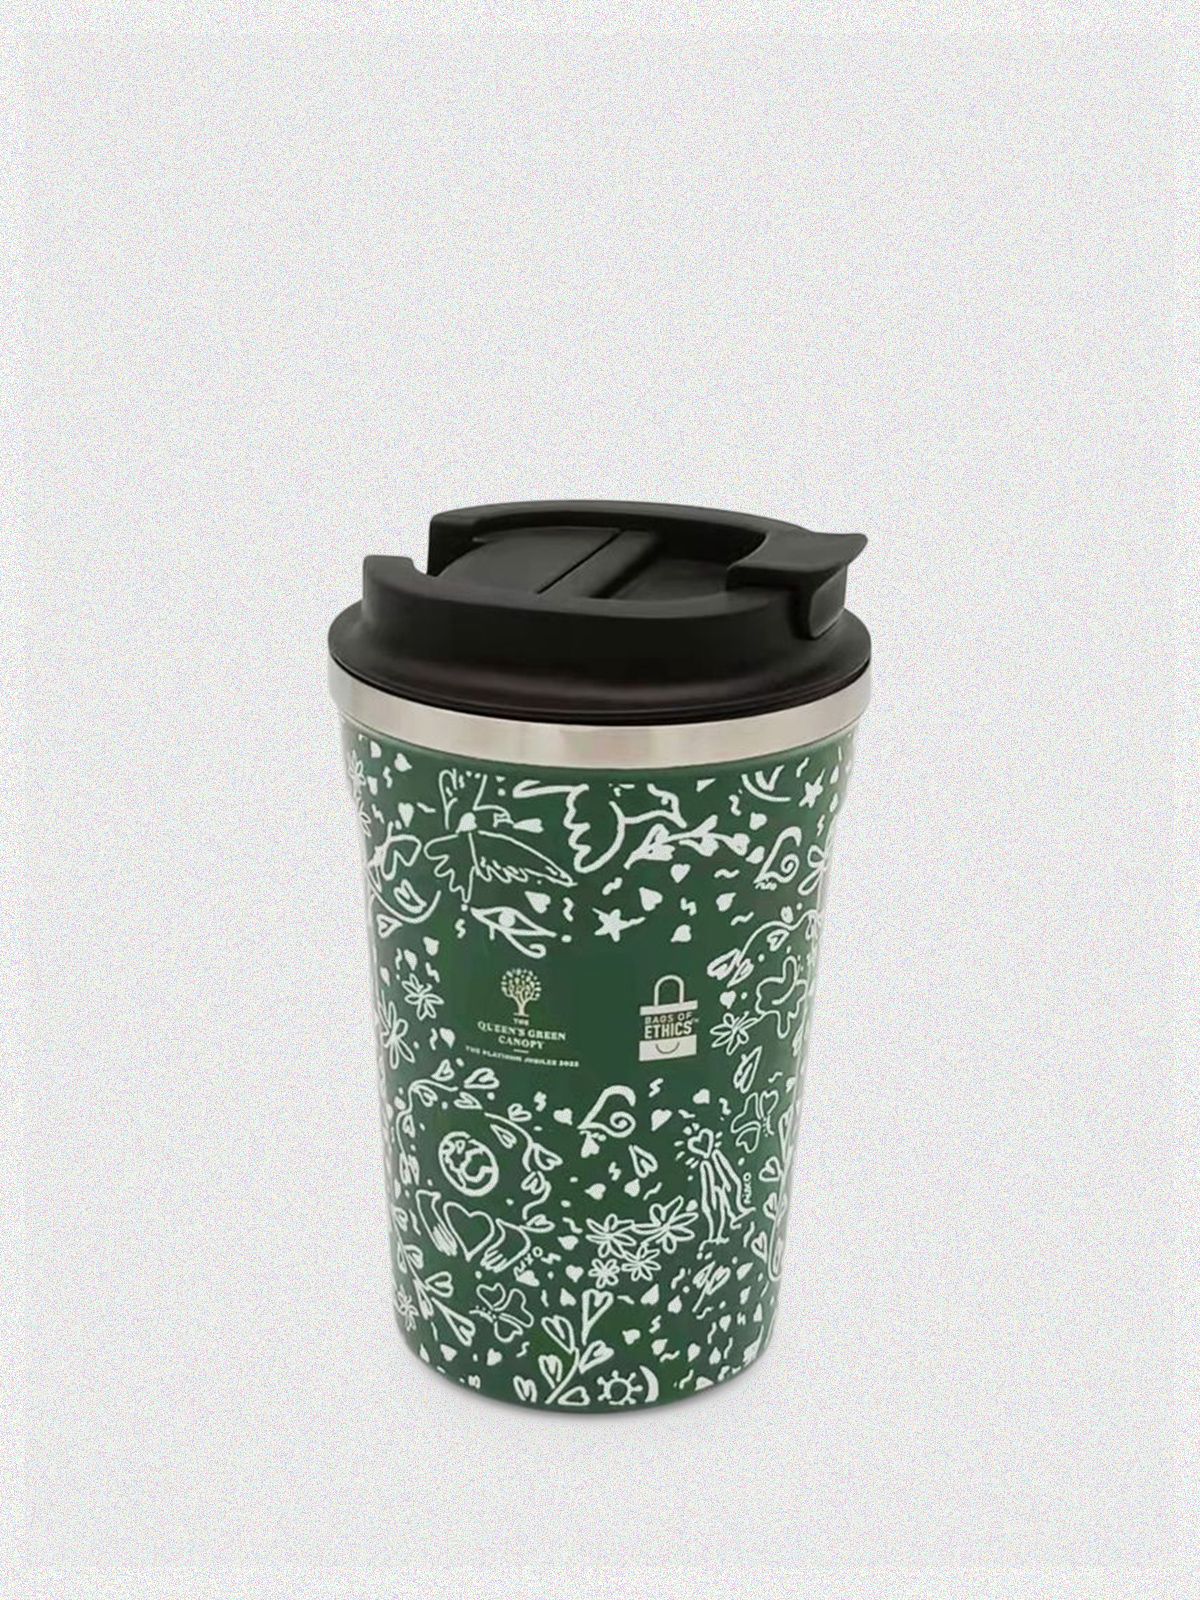 BAGS OF ETHICS Queen's Green Canopy Travel Cup